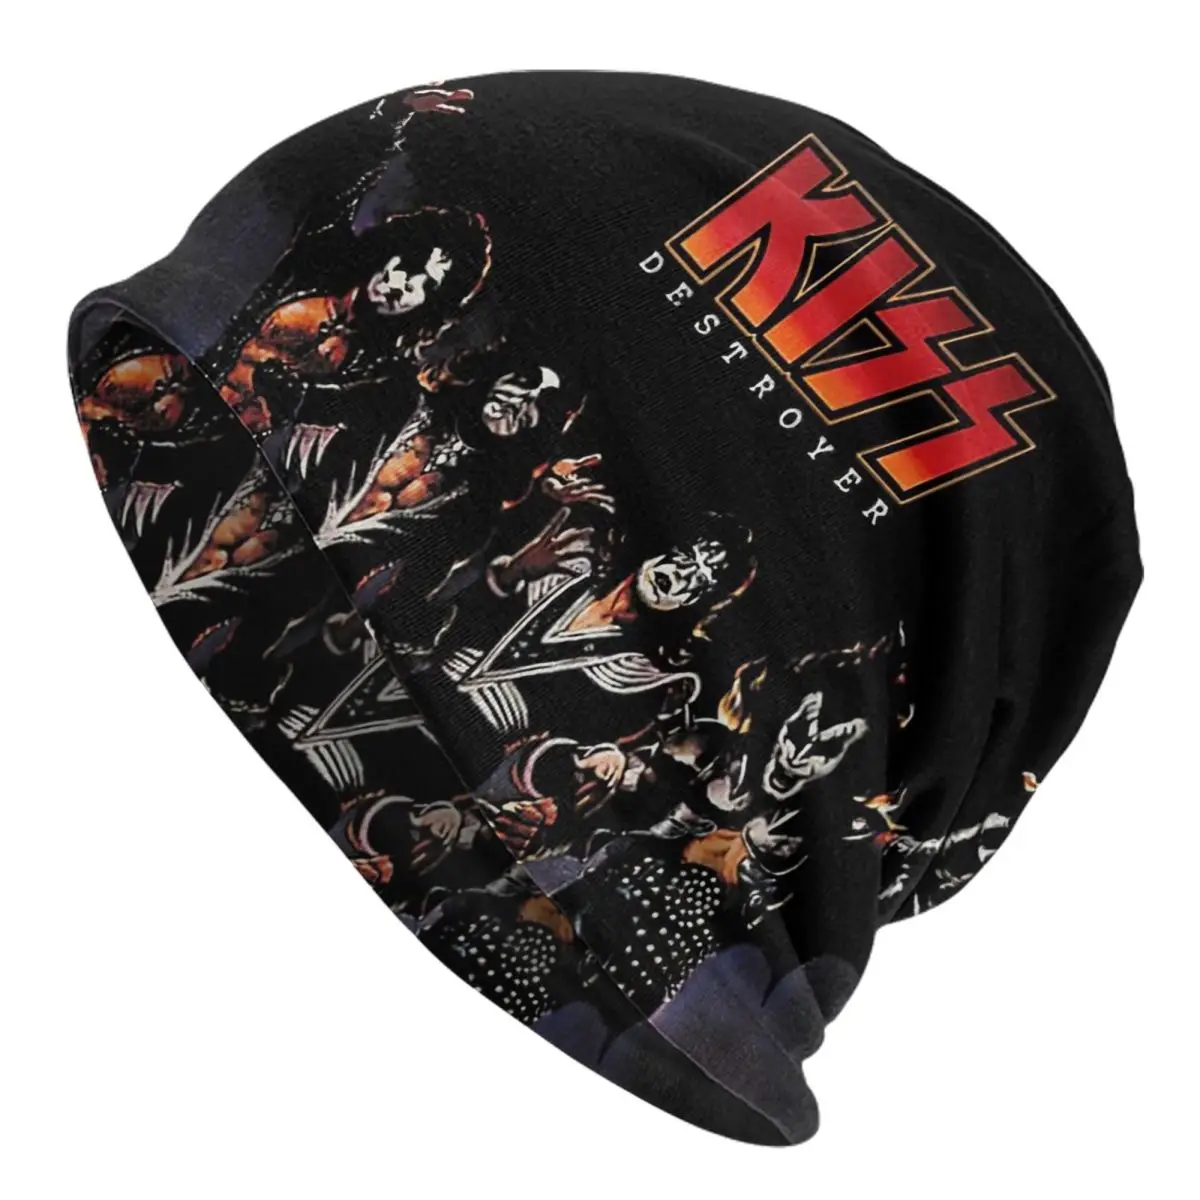 KISS - 1976 Destroyer Adult Men's Women's Knit Hat Keep warm winter Funny knitted hat